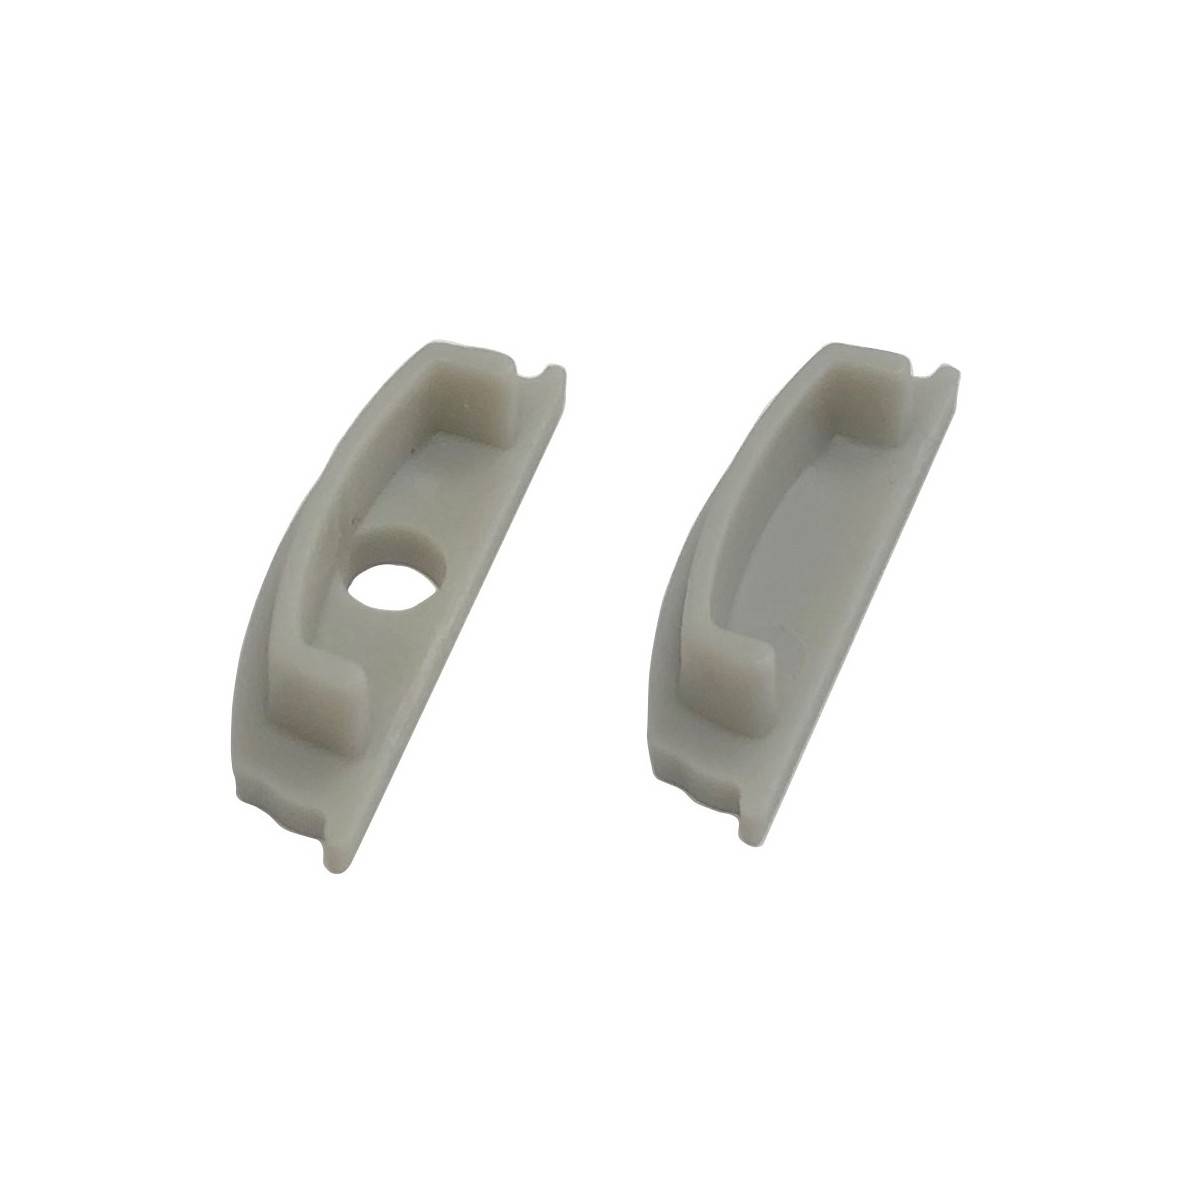 SIDE CAPS FOR FLEXIBLE SURFACE PROFILE 18X6MM (1 PC.)